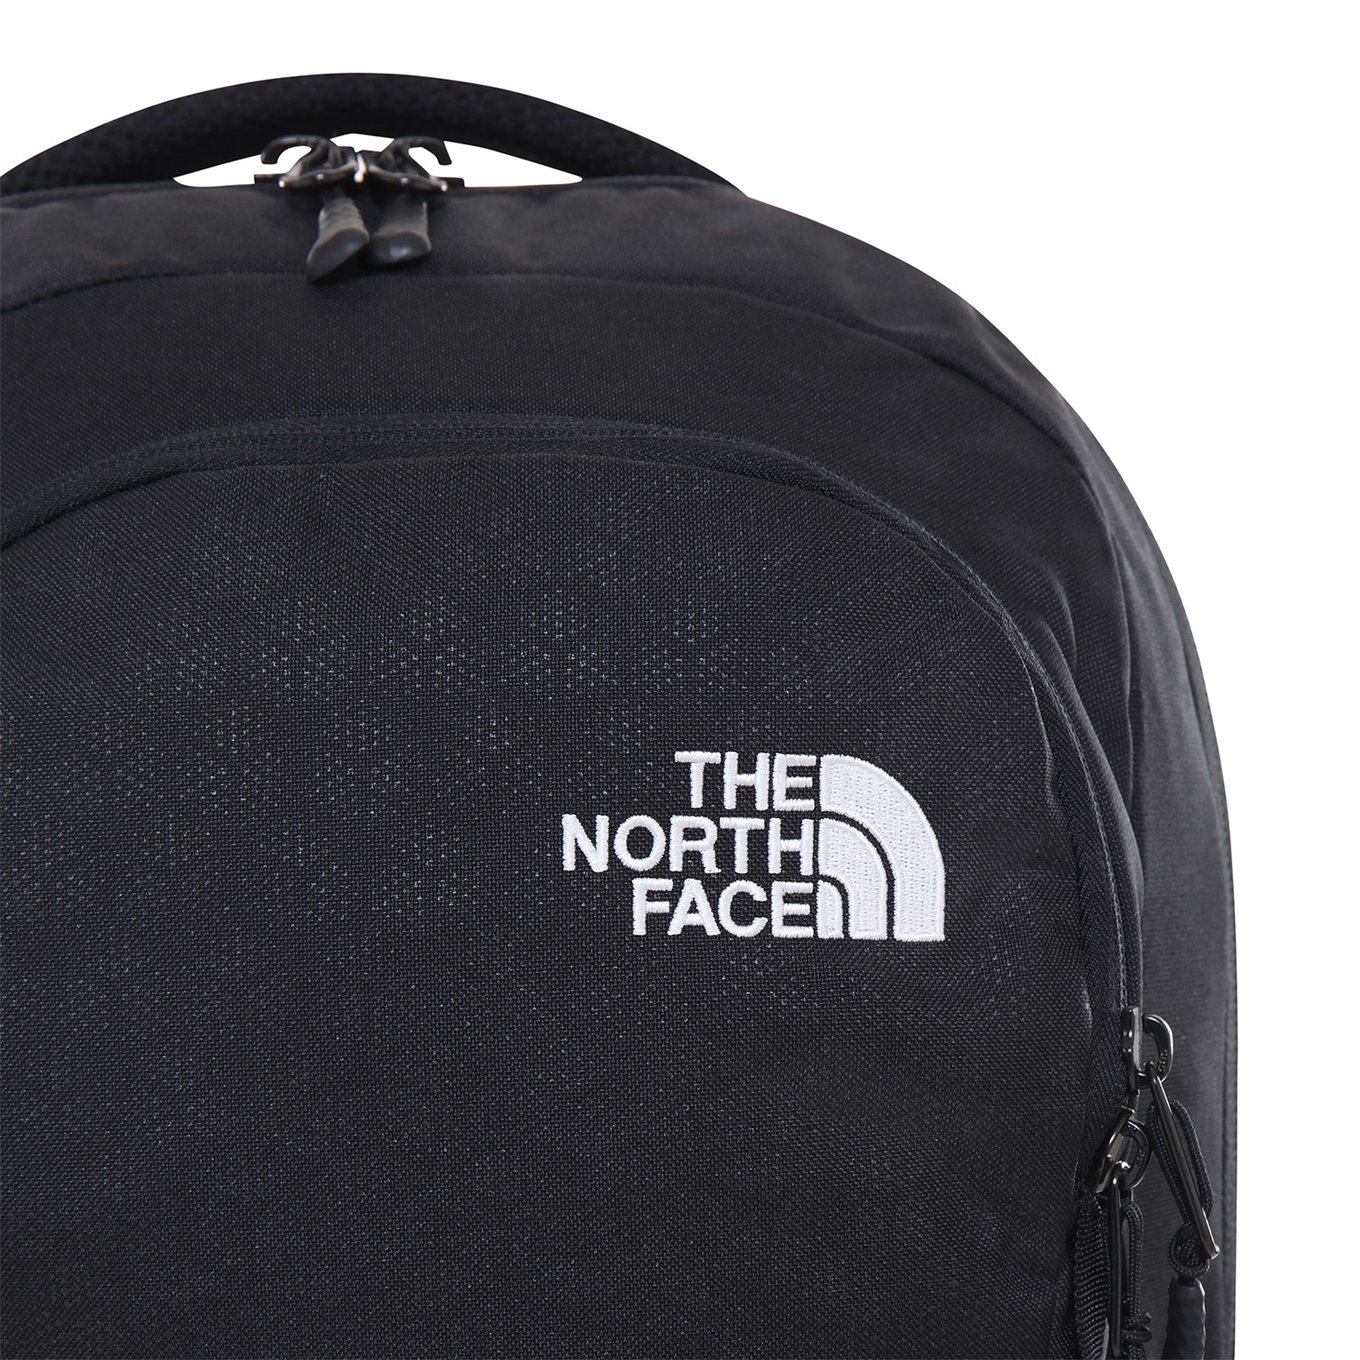 Spanning Voorrecht Volg ons The North Face Tassen? Nú The North Face Tas Online! | Travelbags.nl